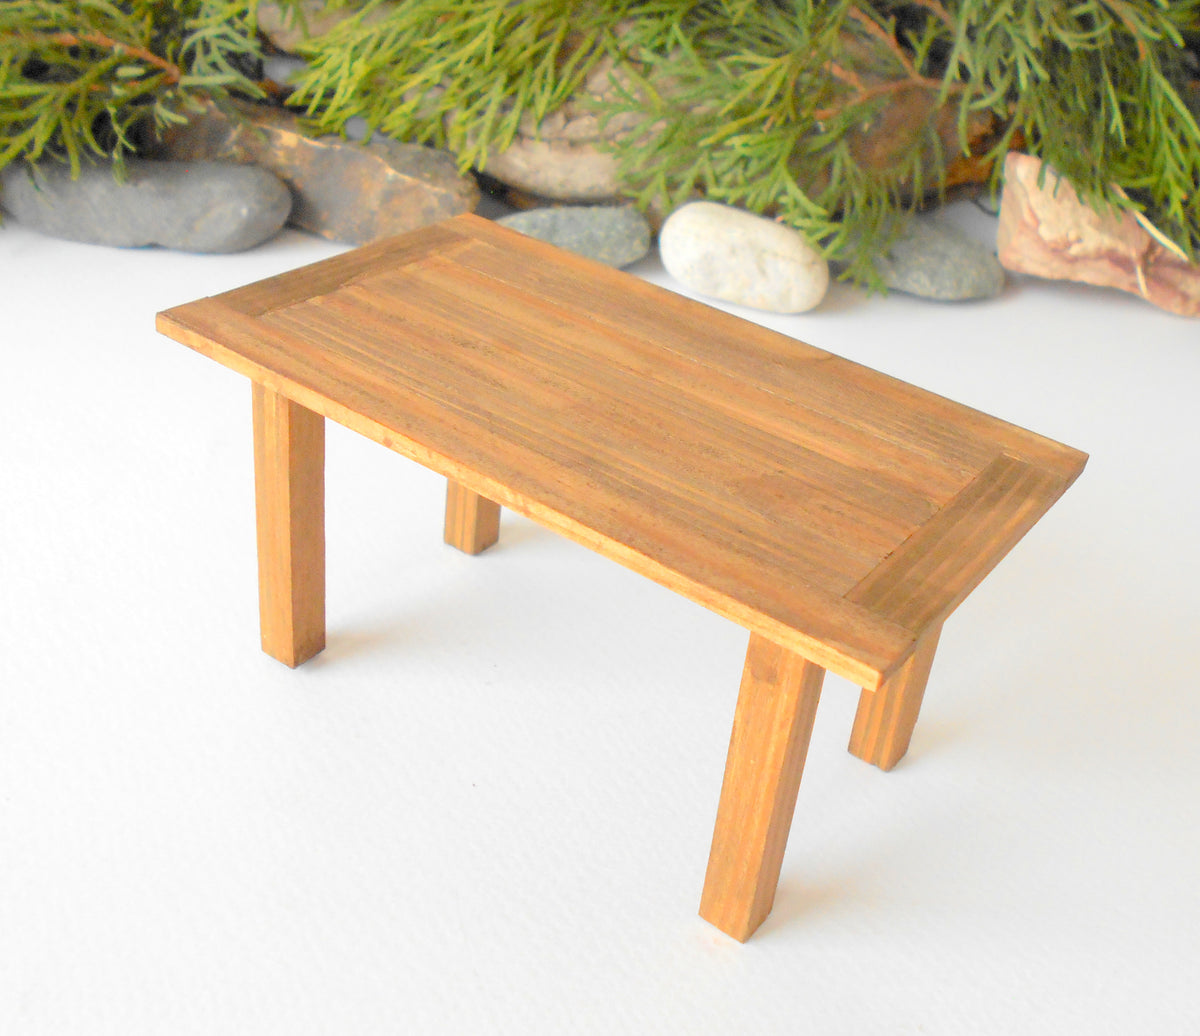 This is a handmade miniature dining or kitchen table on a&amp;nbsp;&lt;span data-mce-fragment=&quot;1&quot;&gt;1/12&lt;/span&gt;&lt;span data-mce-fragment=&quot;1&quot;&gt;th&lt;/span&gt; scale that is suitable for 6 mini chairs on a 1/12th scale. I handmade this table on order with real pine wood boards and beams and with water-based eco-friendly glue. I have stained that table with Italian eco-friendly mordant in light brown.